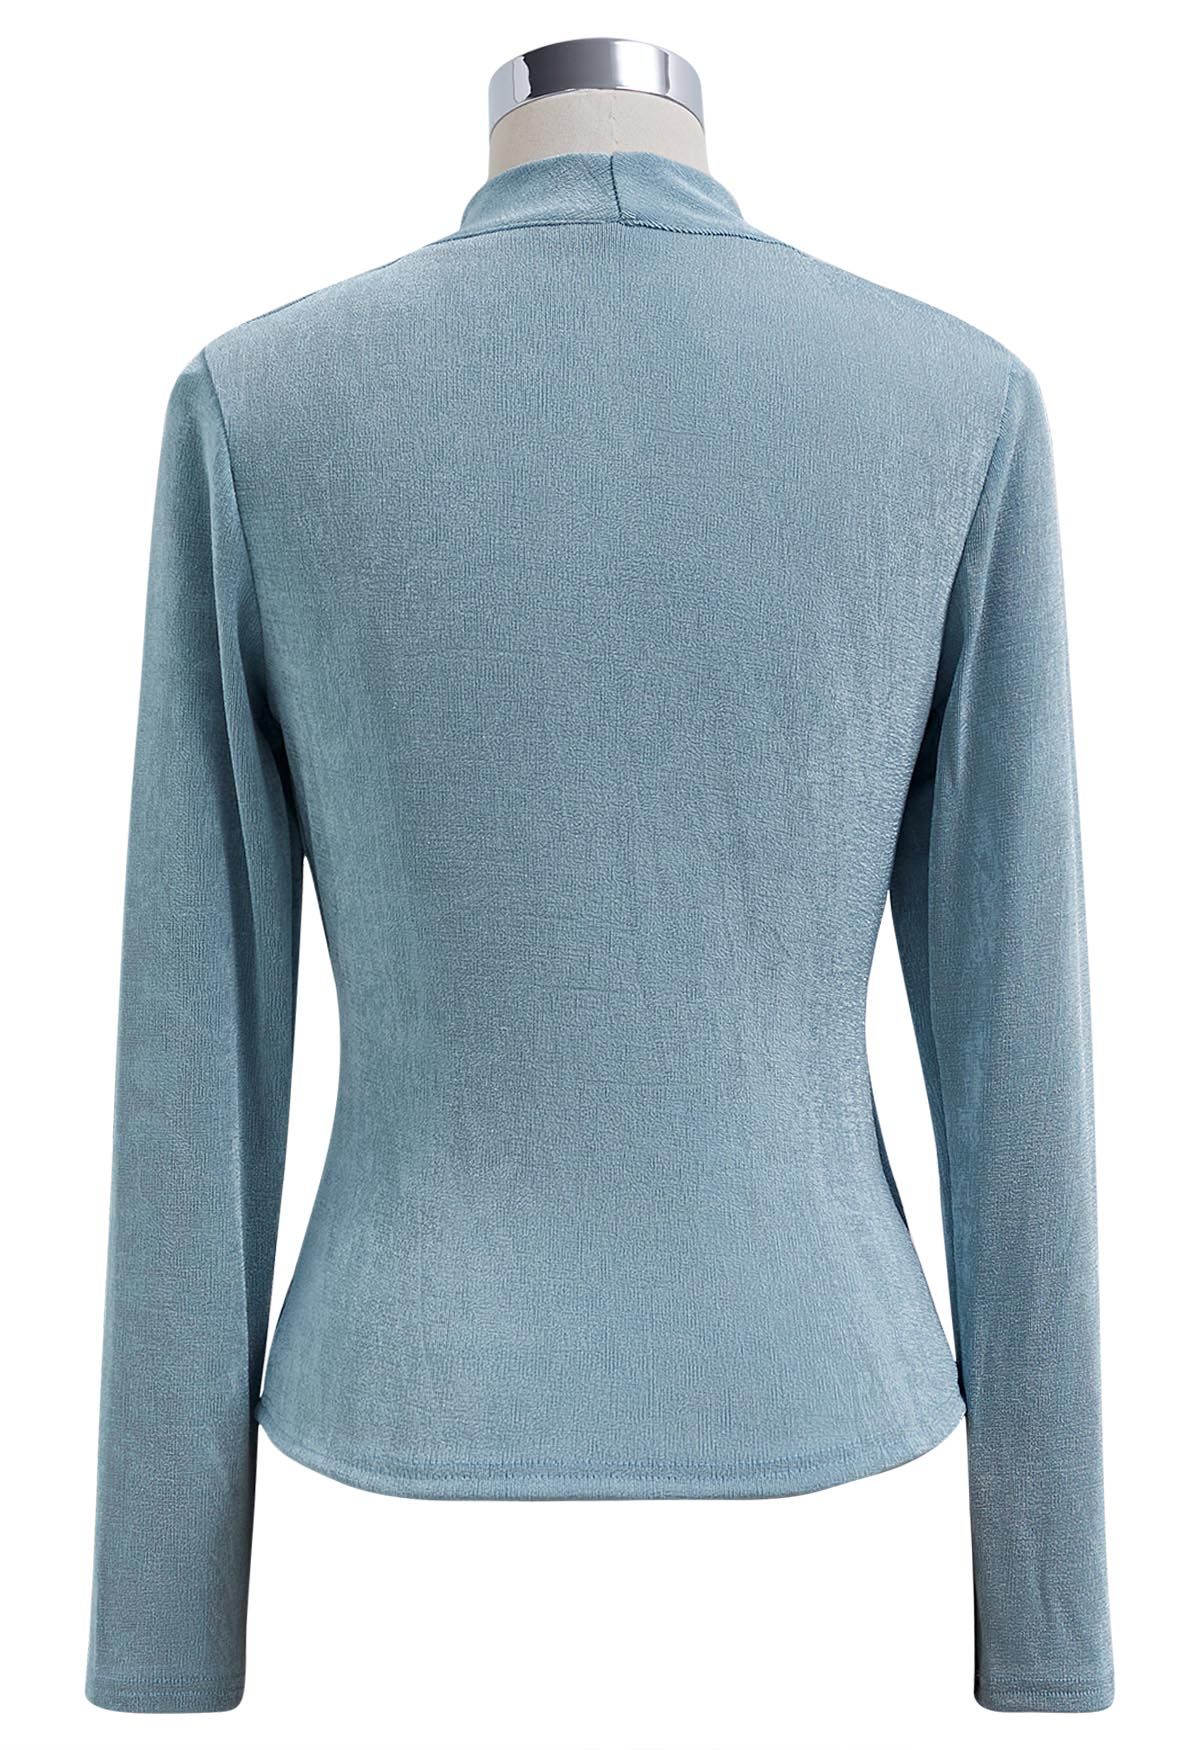 Ruched Waist Faux-Wrap Top in Dusty Blue